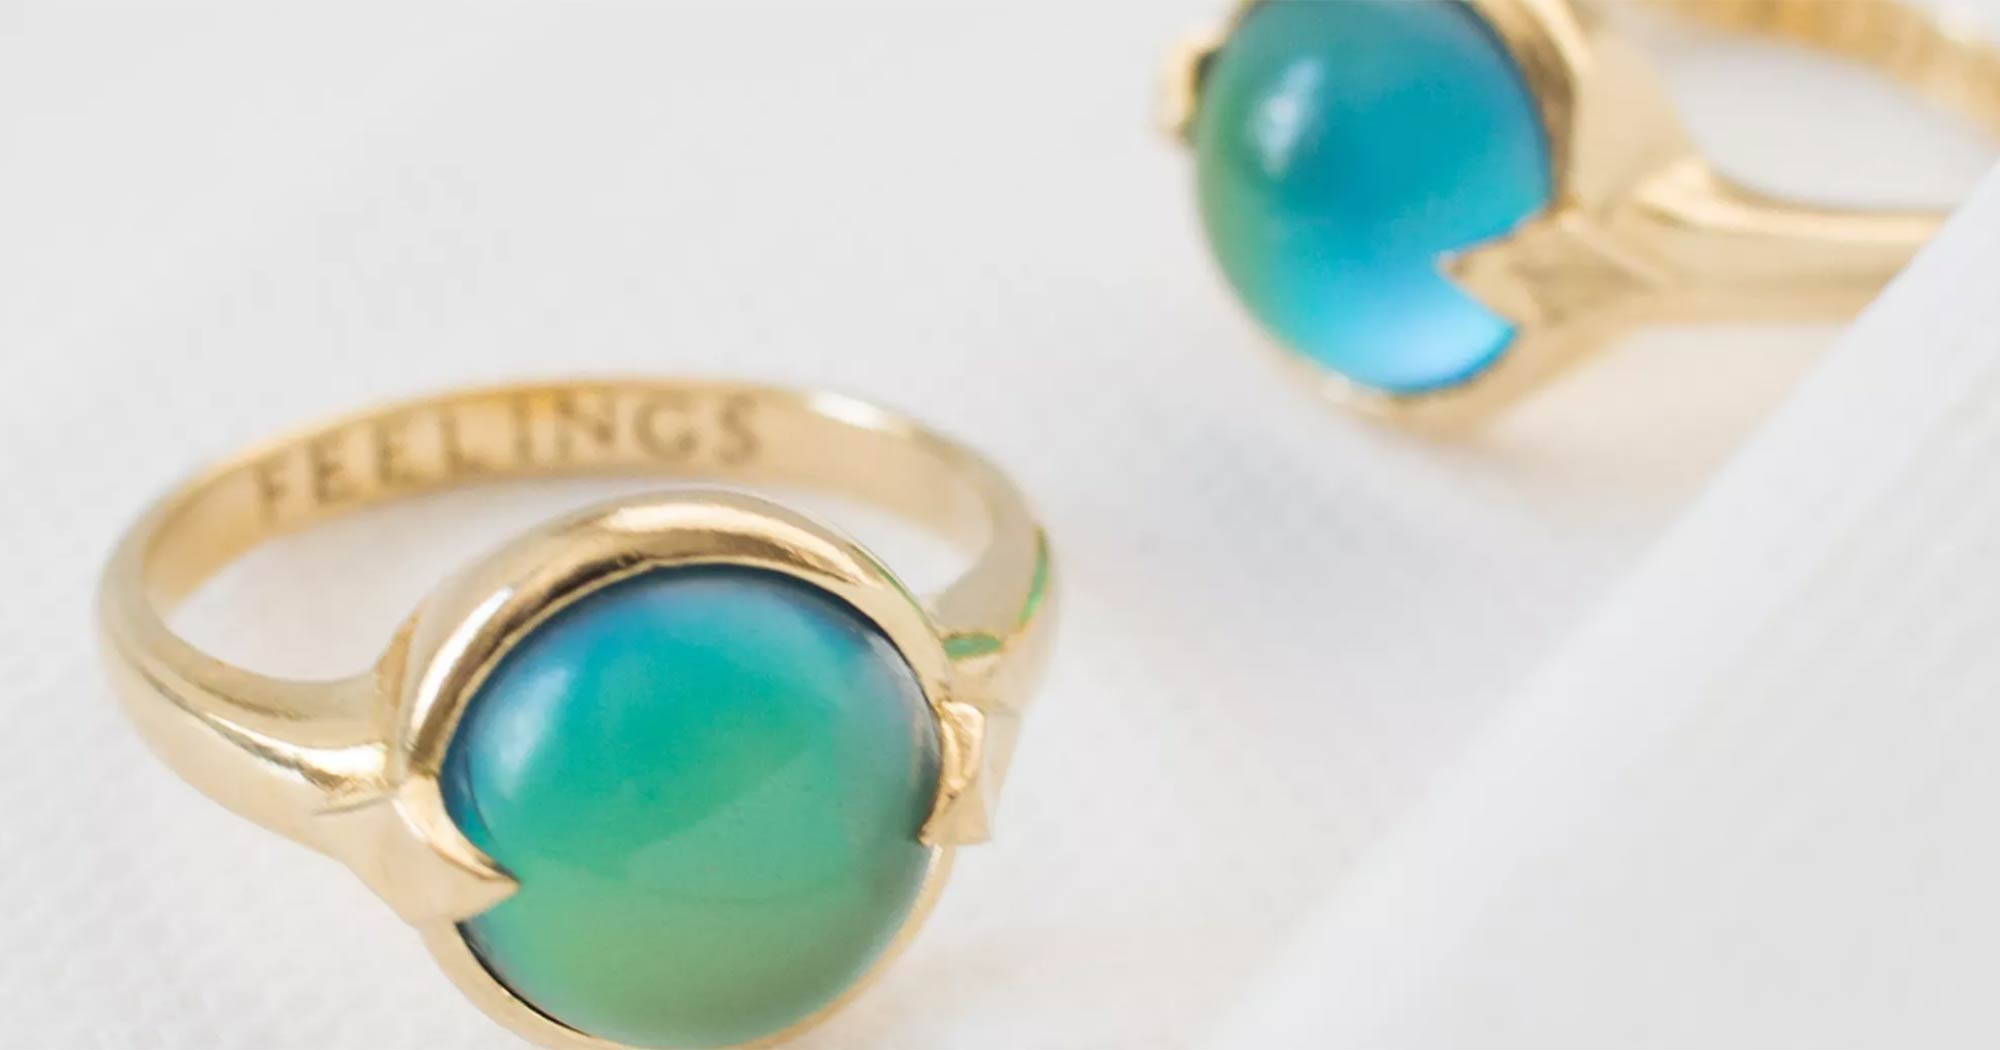 Mood rings: Do they really work? What to know about the popular retro  jewelry item | Fox News